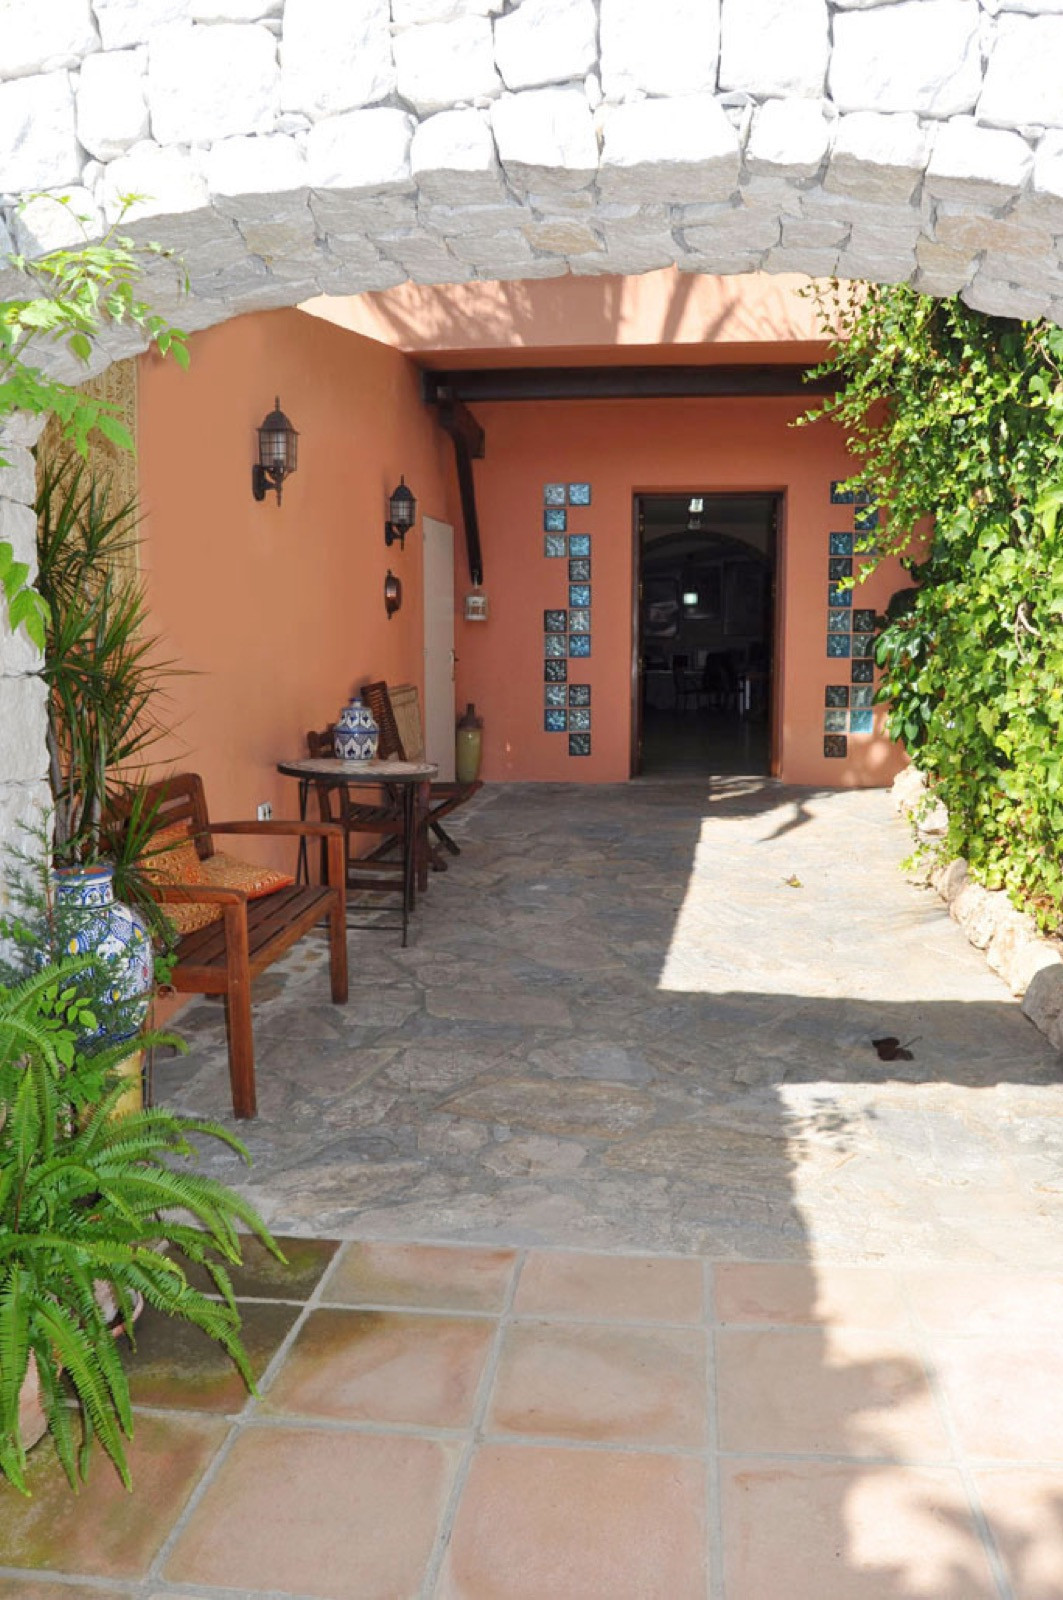 Villa with covered porch with wooden beams, garden with lighting and fruit trees, terraces with splendid views in Paraiso Barronal